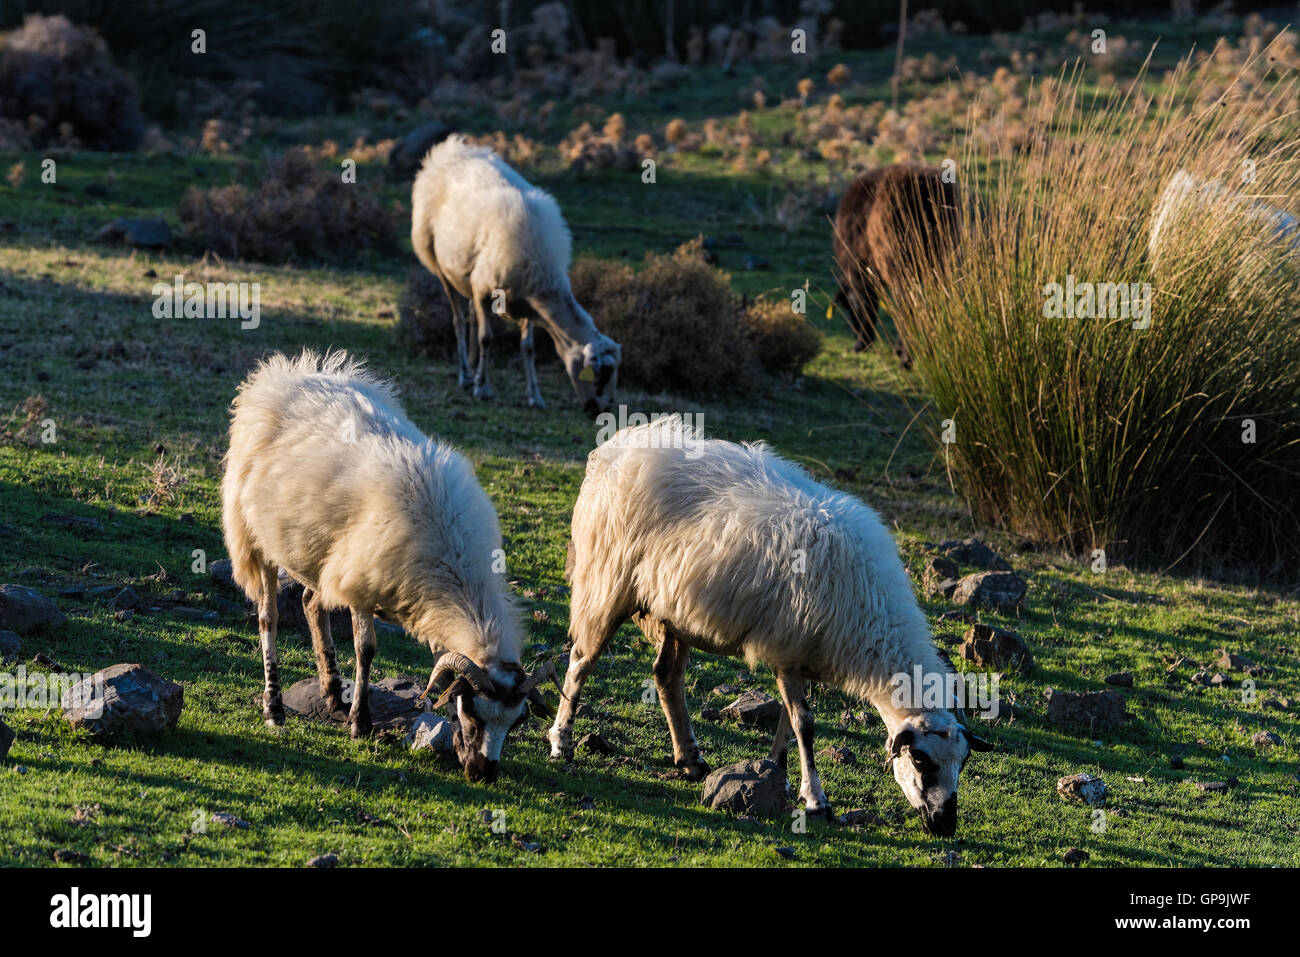 A flock of sheep graze in a green field at sunset in Kos island, Greece Stock Photo